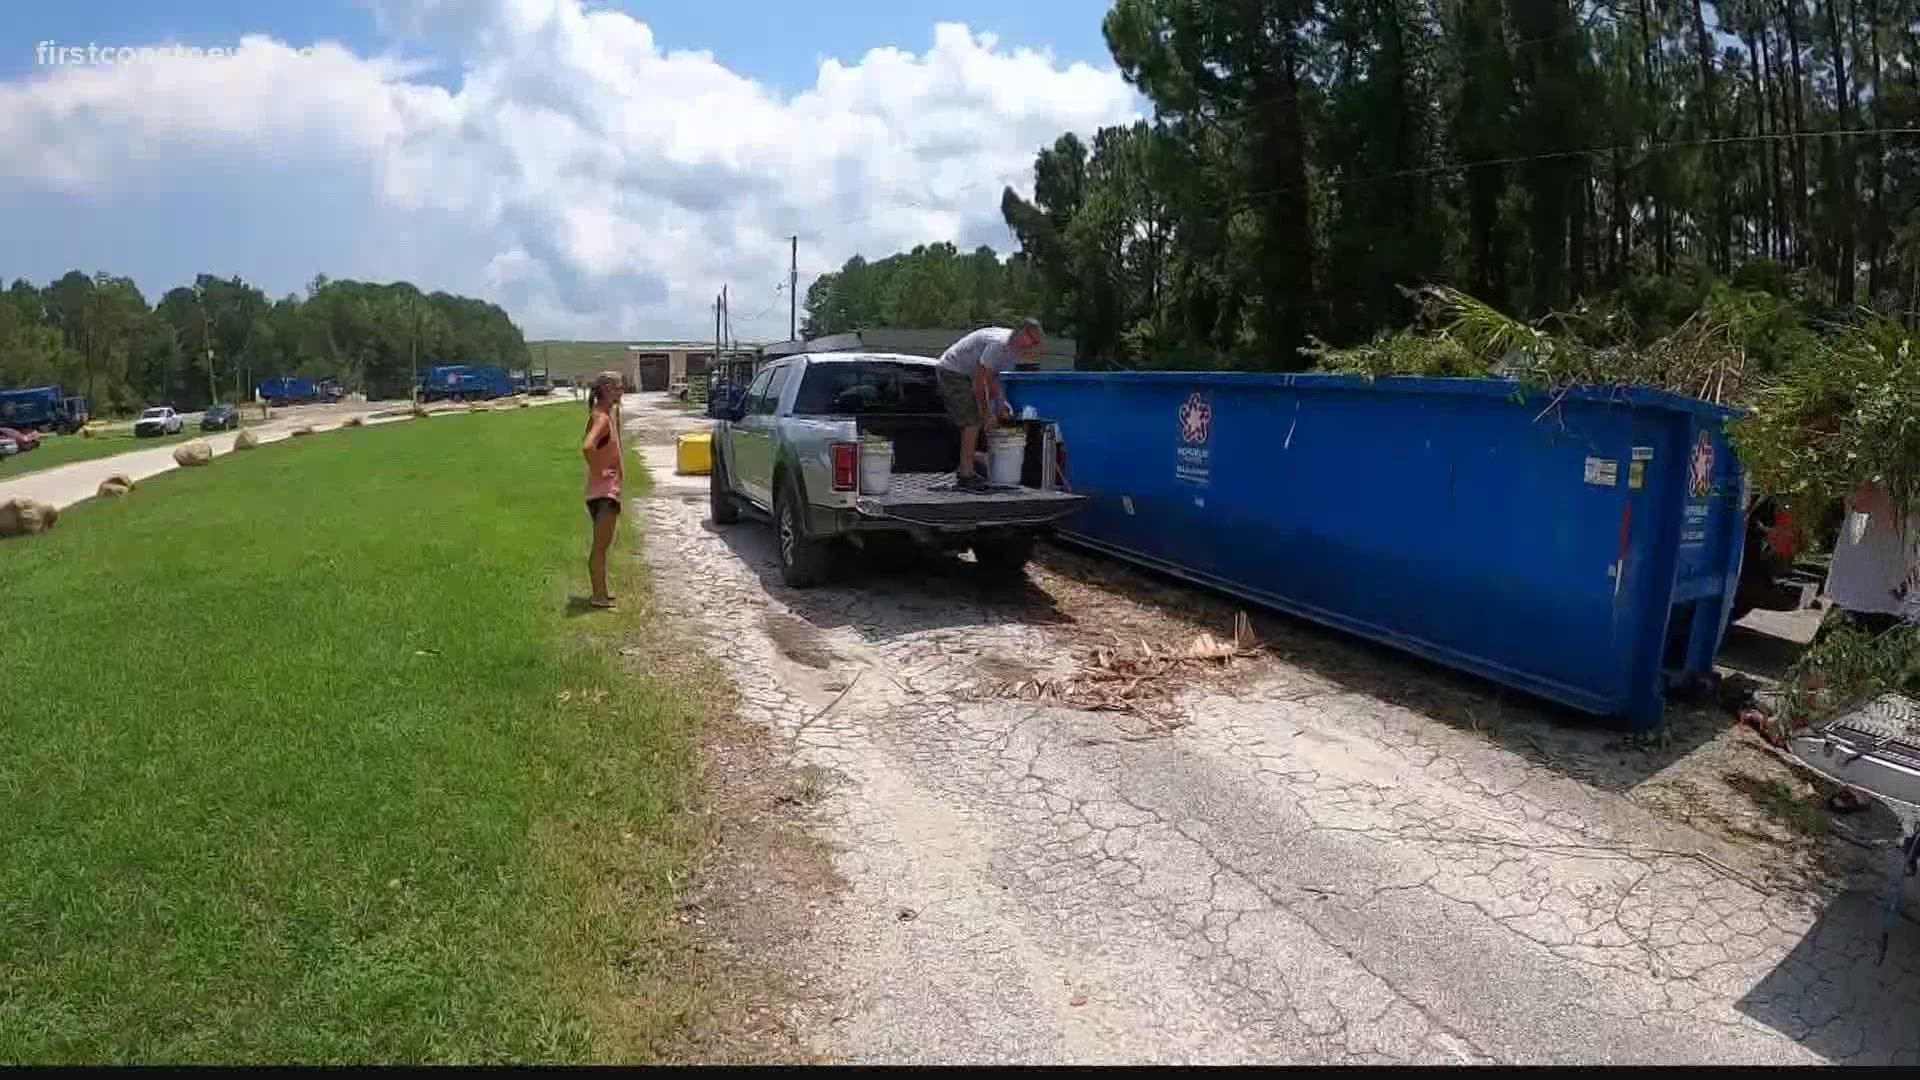 There was so much debris dropped off Wednesday that the county needed a second dumpster to handle the load.